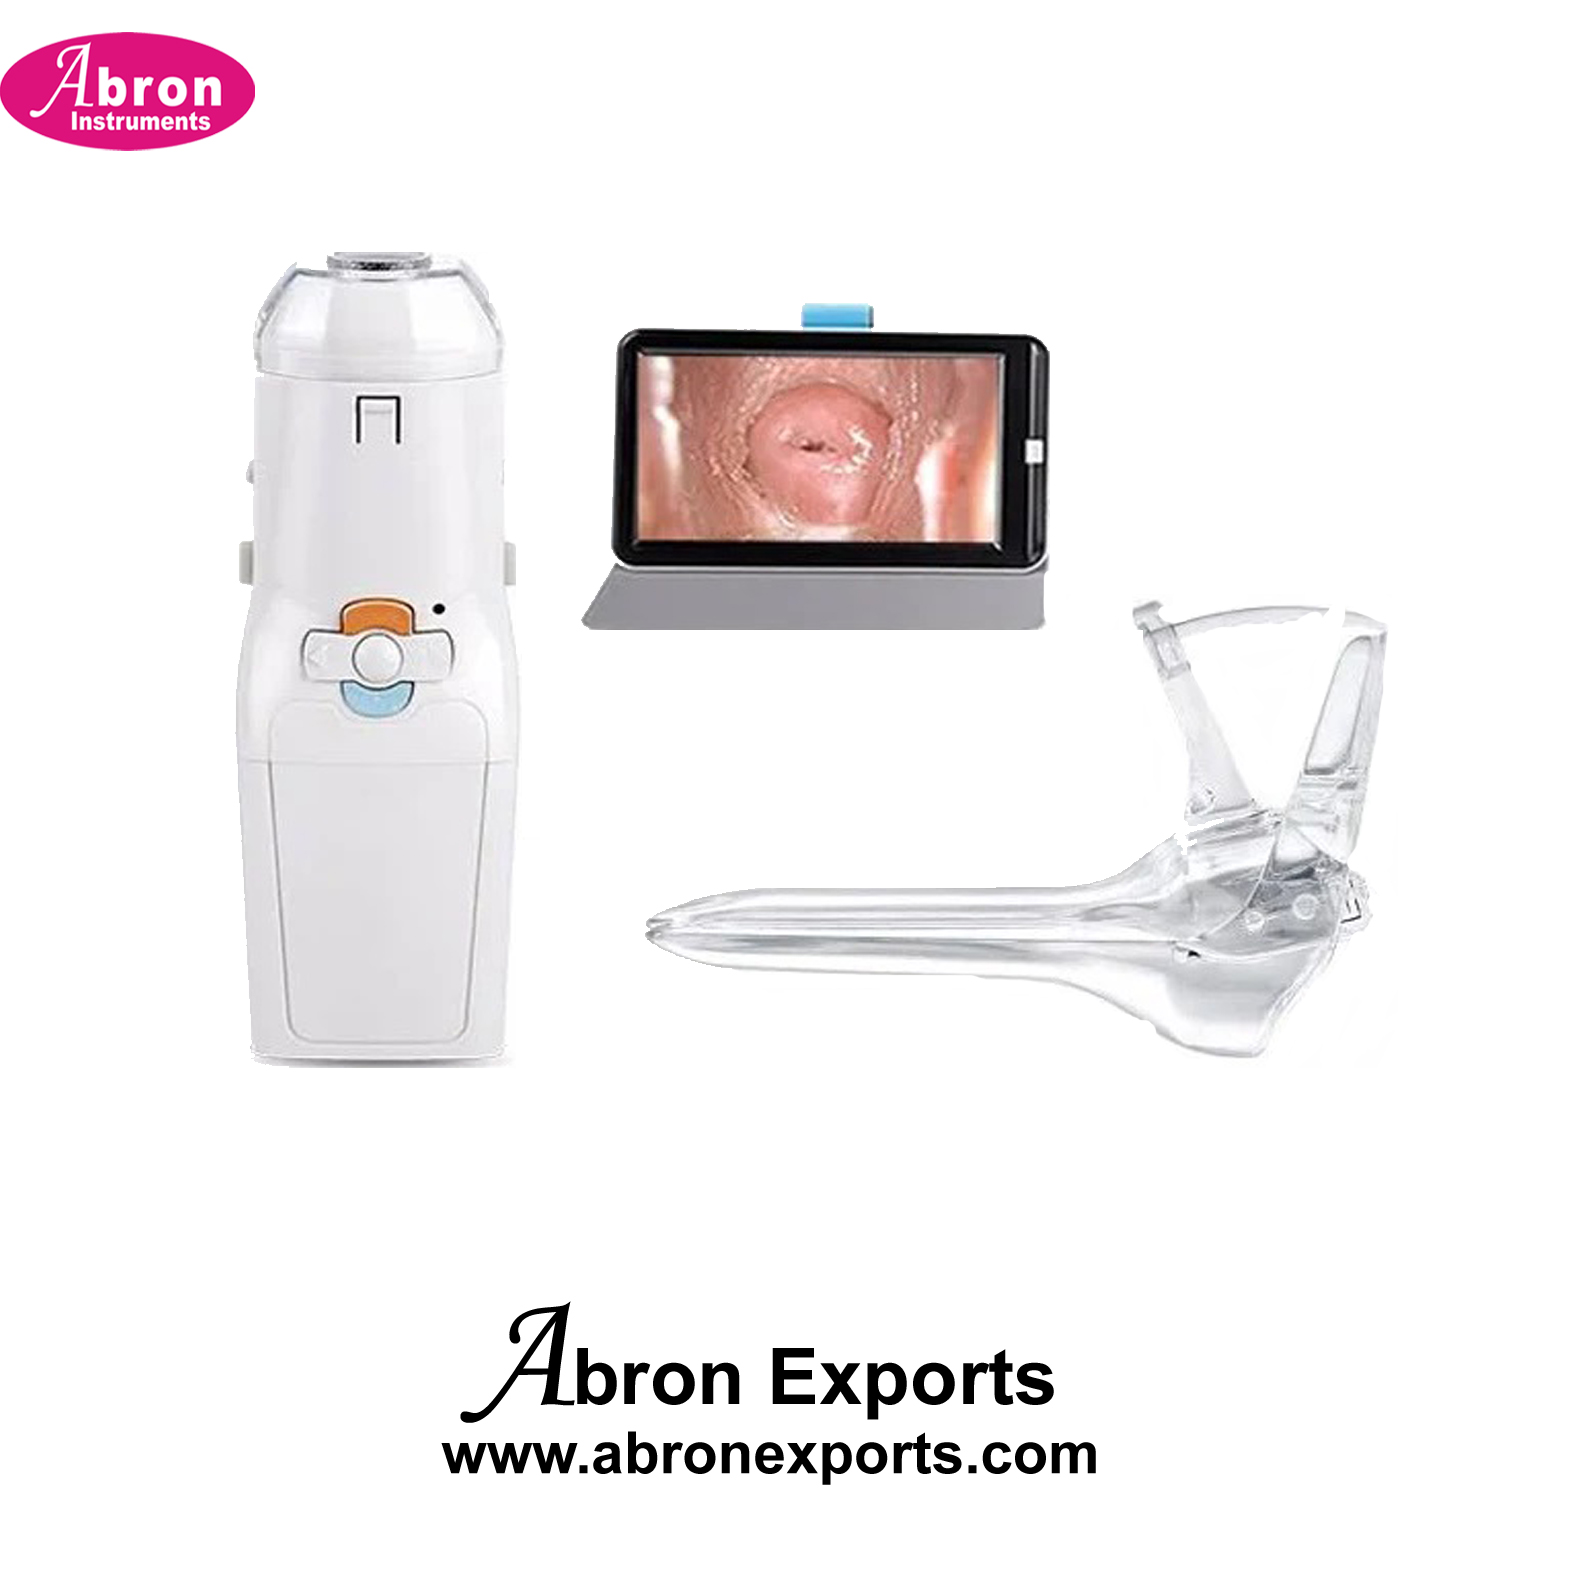 Gynecology Digital Video Colposcope with Reporting outputs portable for monitor treatment Abron ABM-2904P 